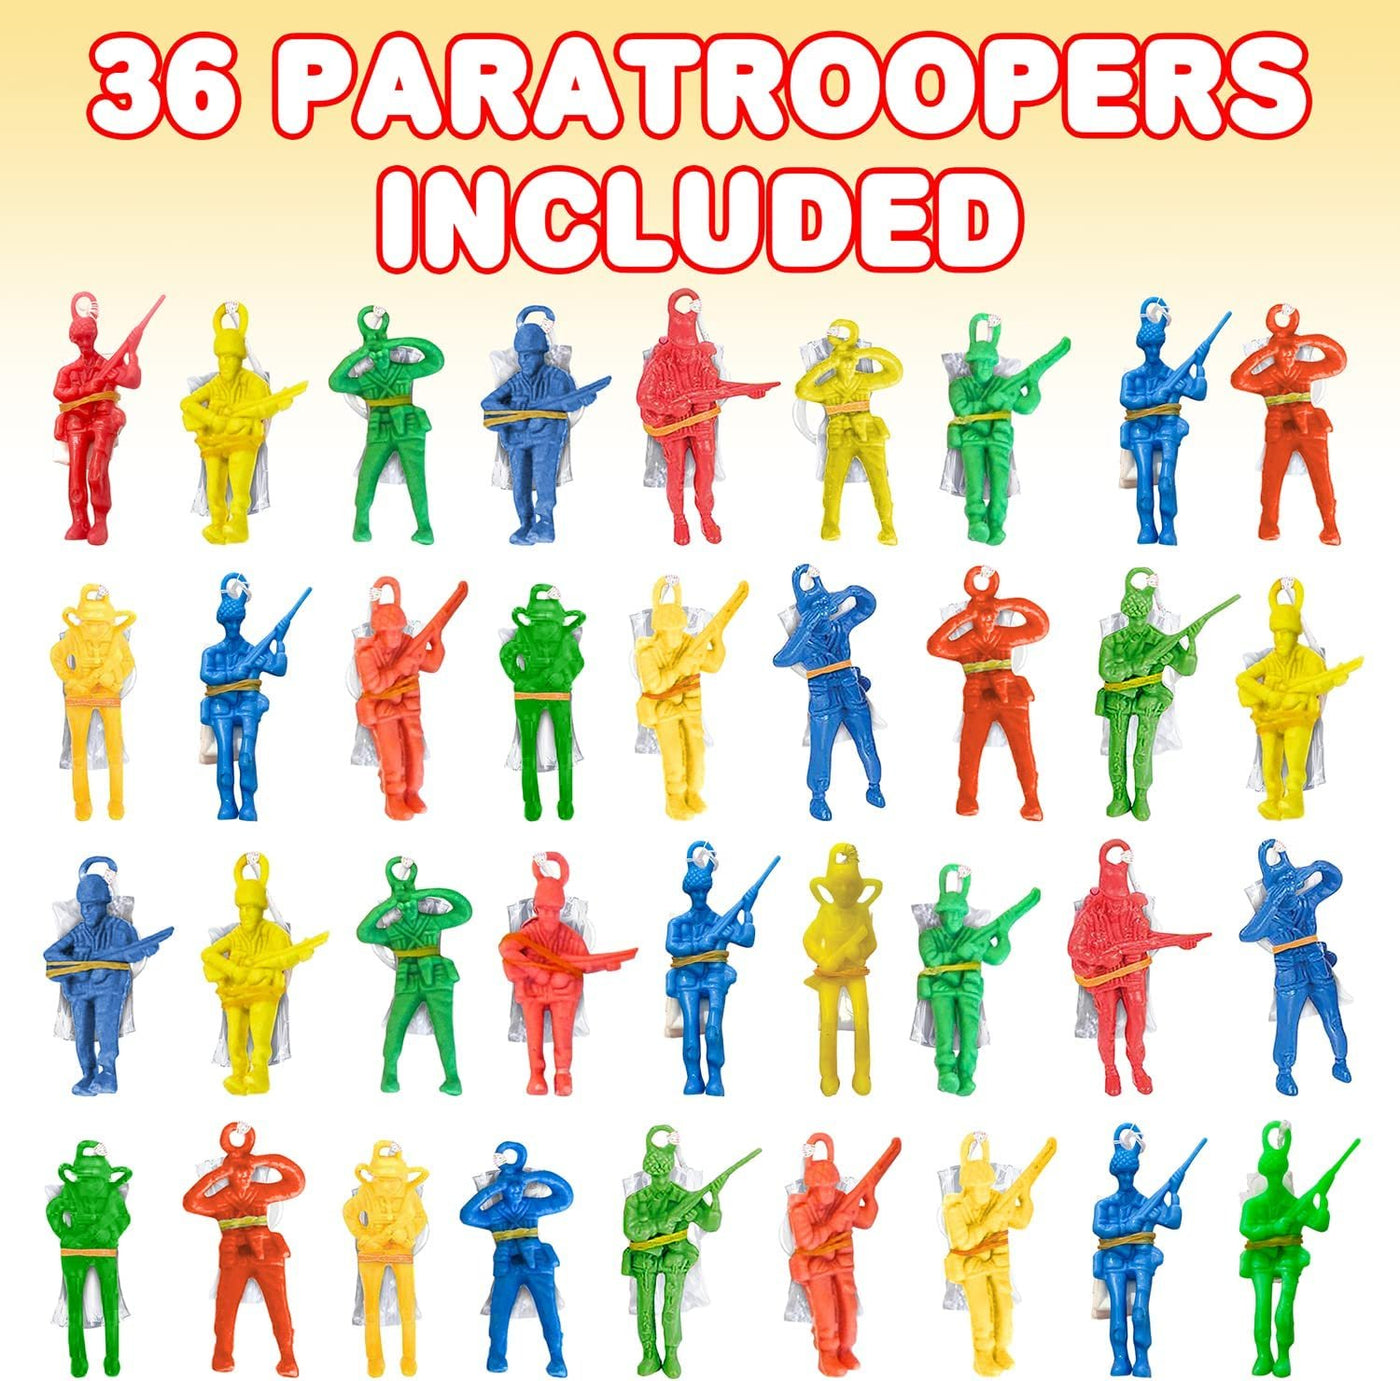 Mini Paratroopers with Parachutes, Bulk Pack of 36, Vinyl Parachute Men Toy in Assorted Colors, Durable Plastic Army Guys Playset, Fun Parachute Party Favors, for Boys and Girls